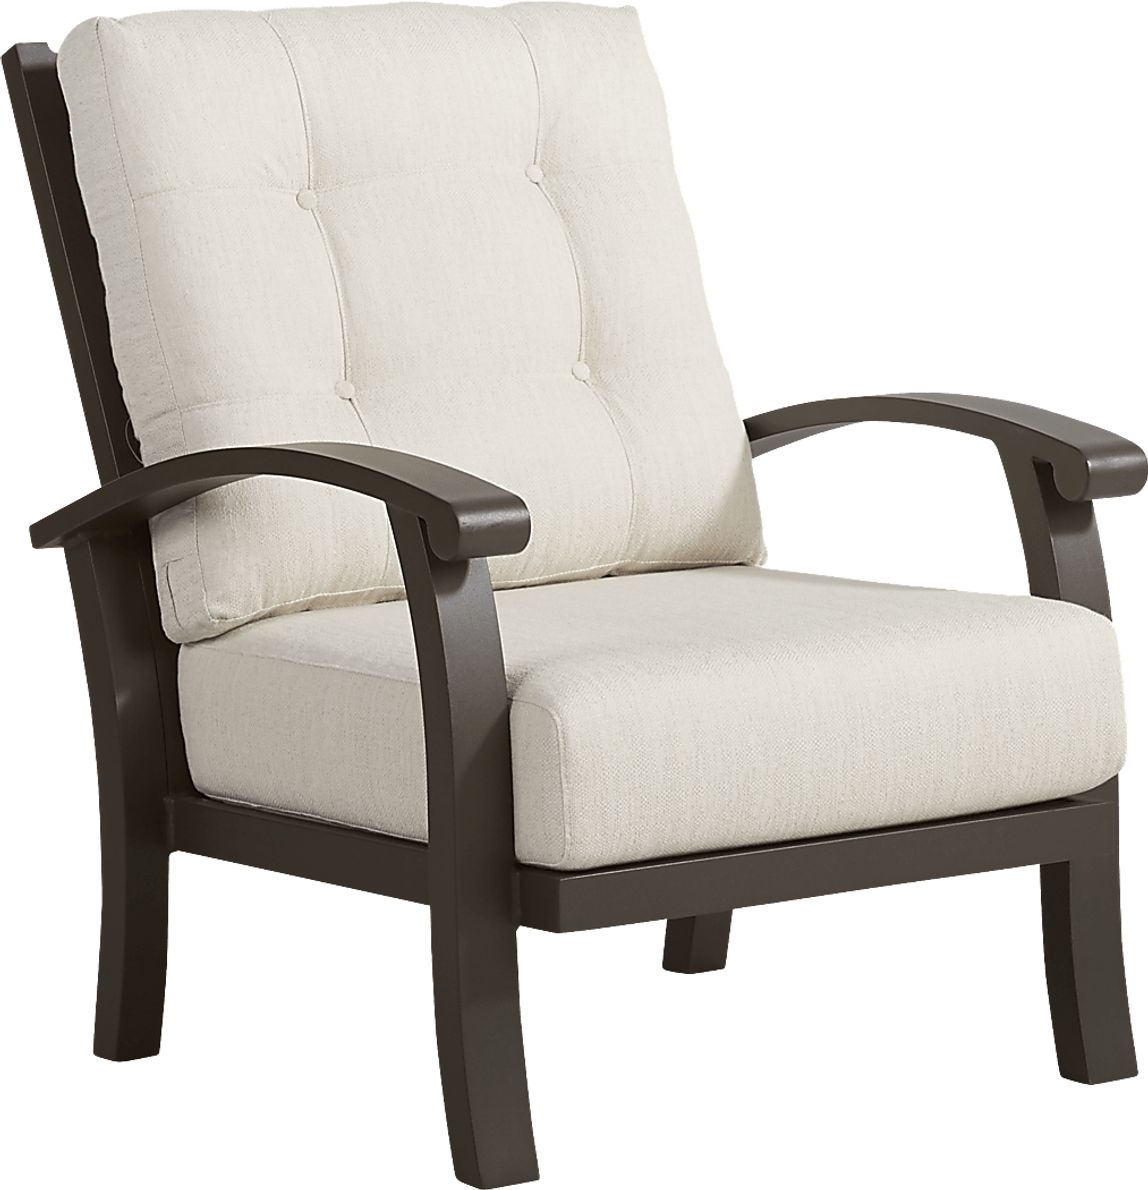 Lake Breeze Aged Bronze Outdoor Club Chair with Parchment Cushions